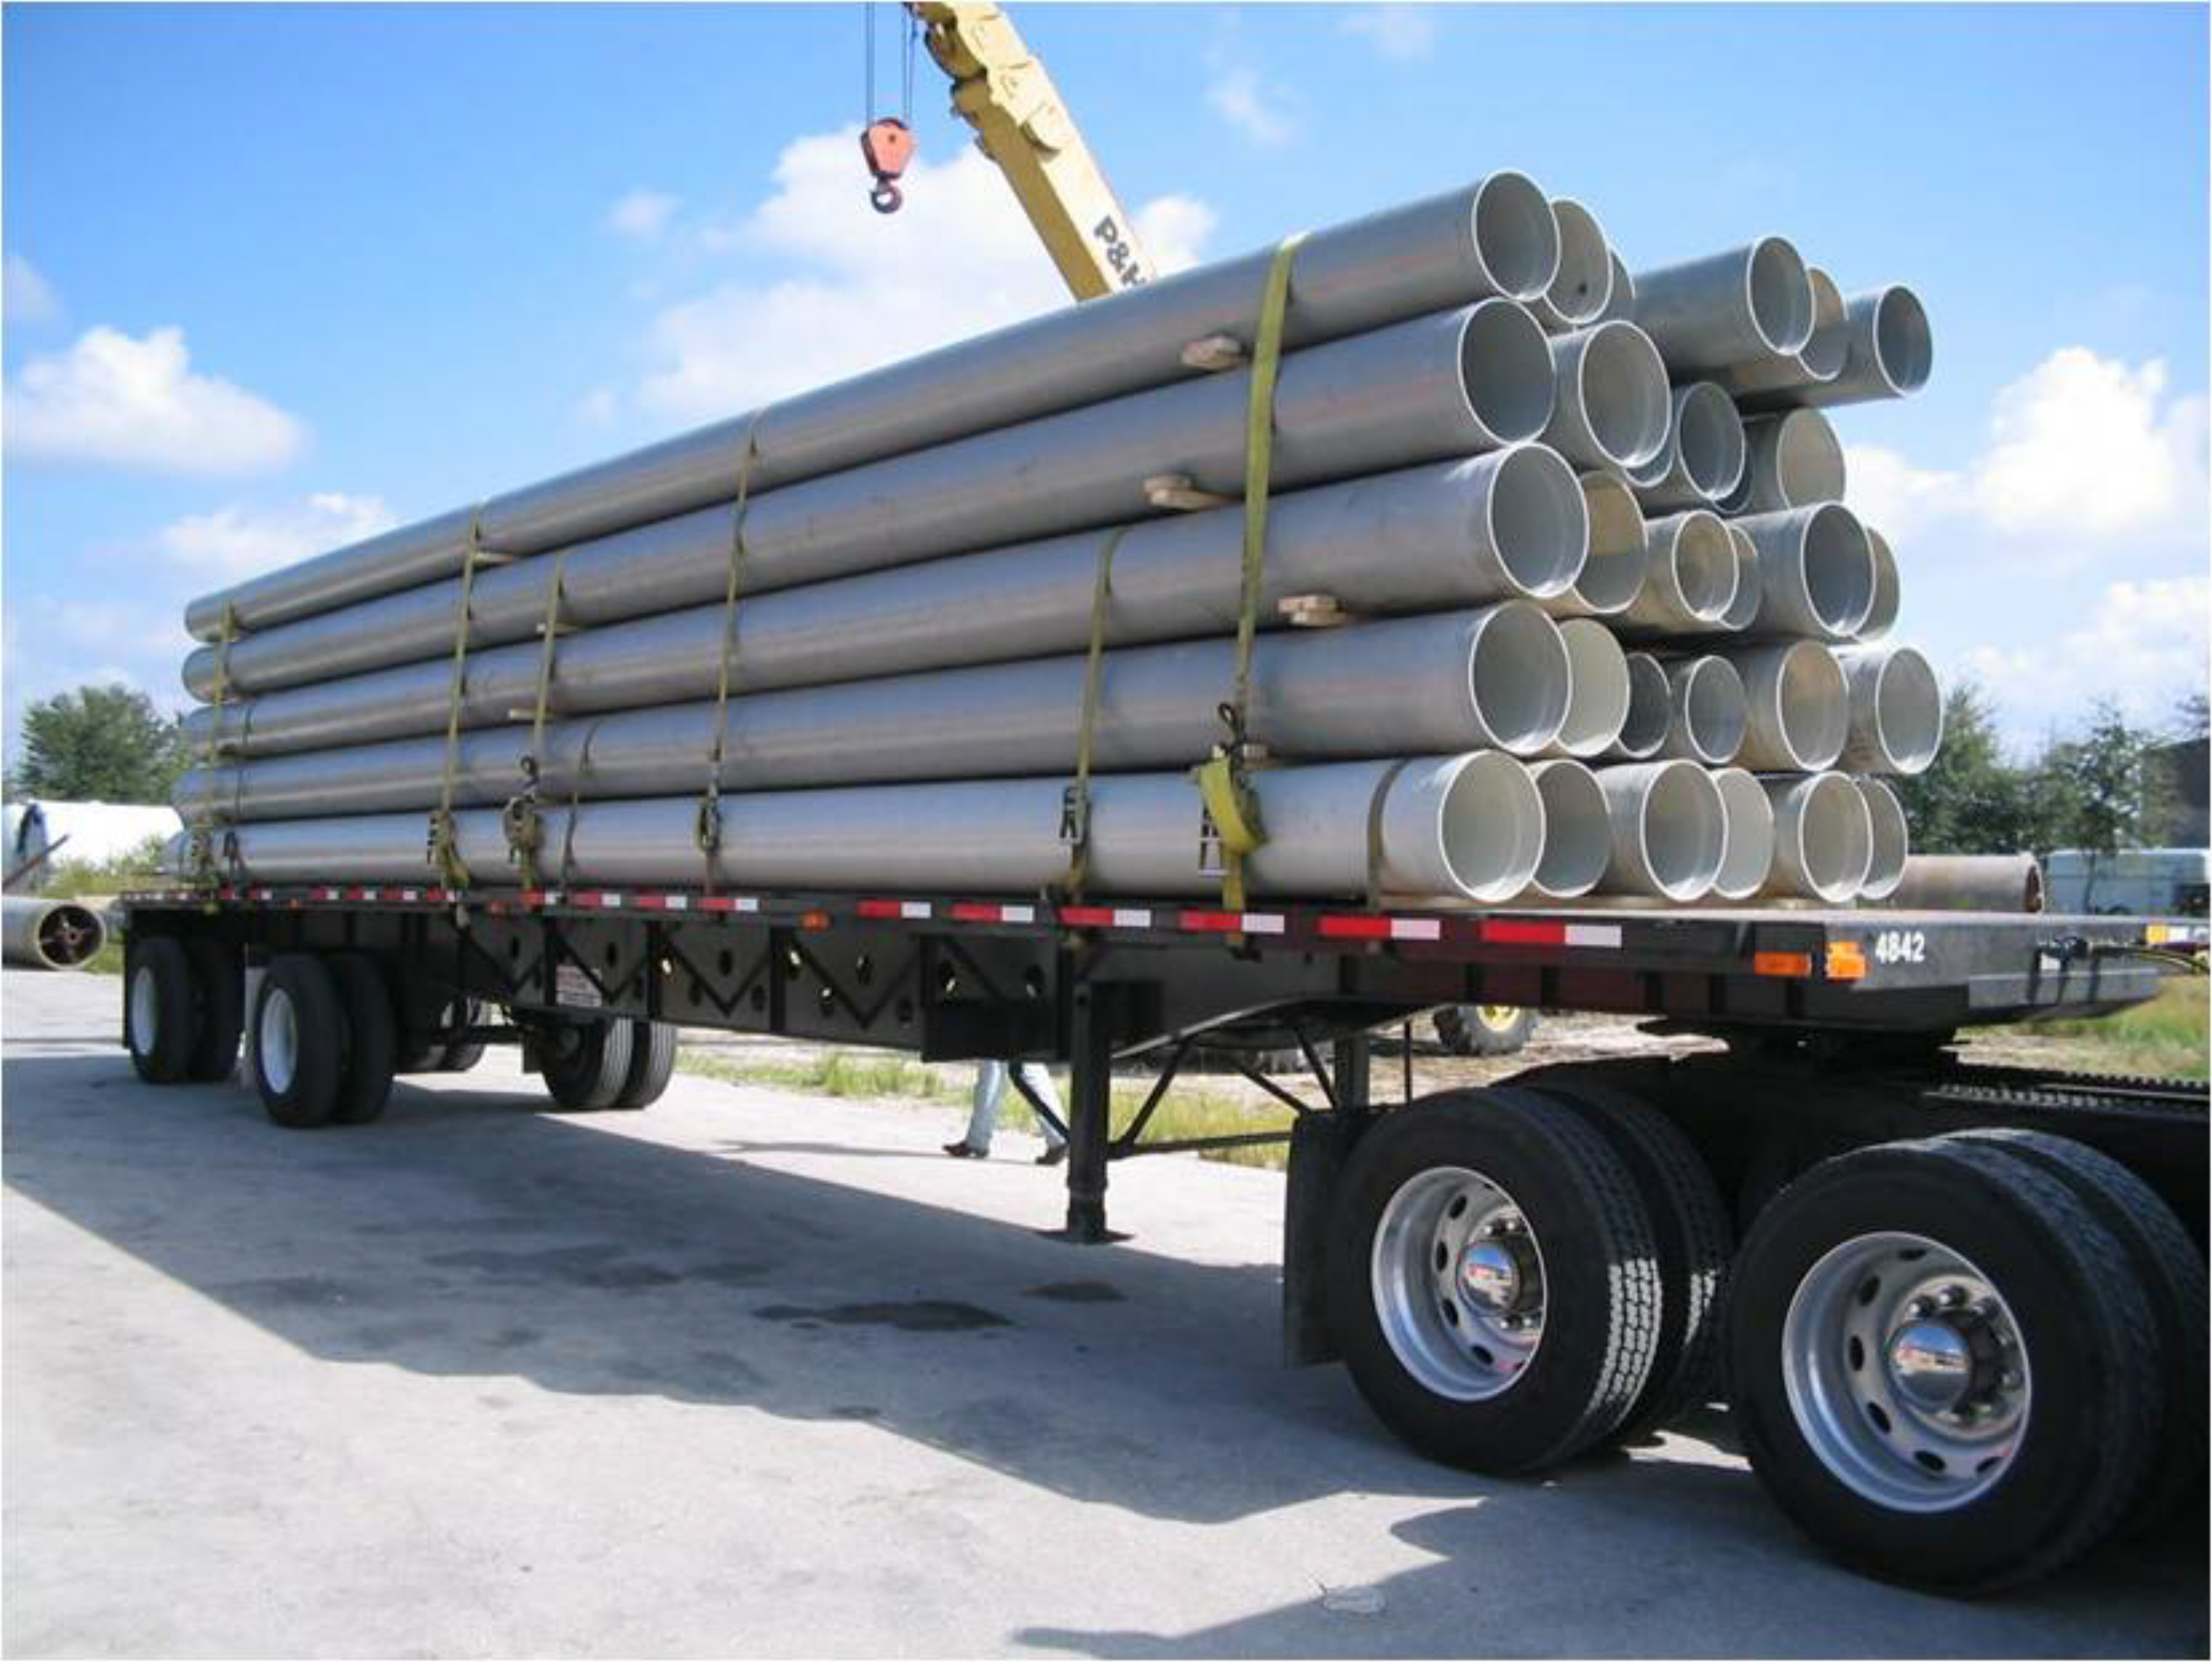 The FRP pipe and duct products are available in sizes ranging from 3/8 inch to 168 inch.